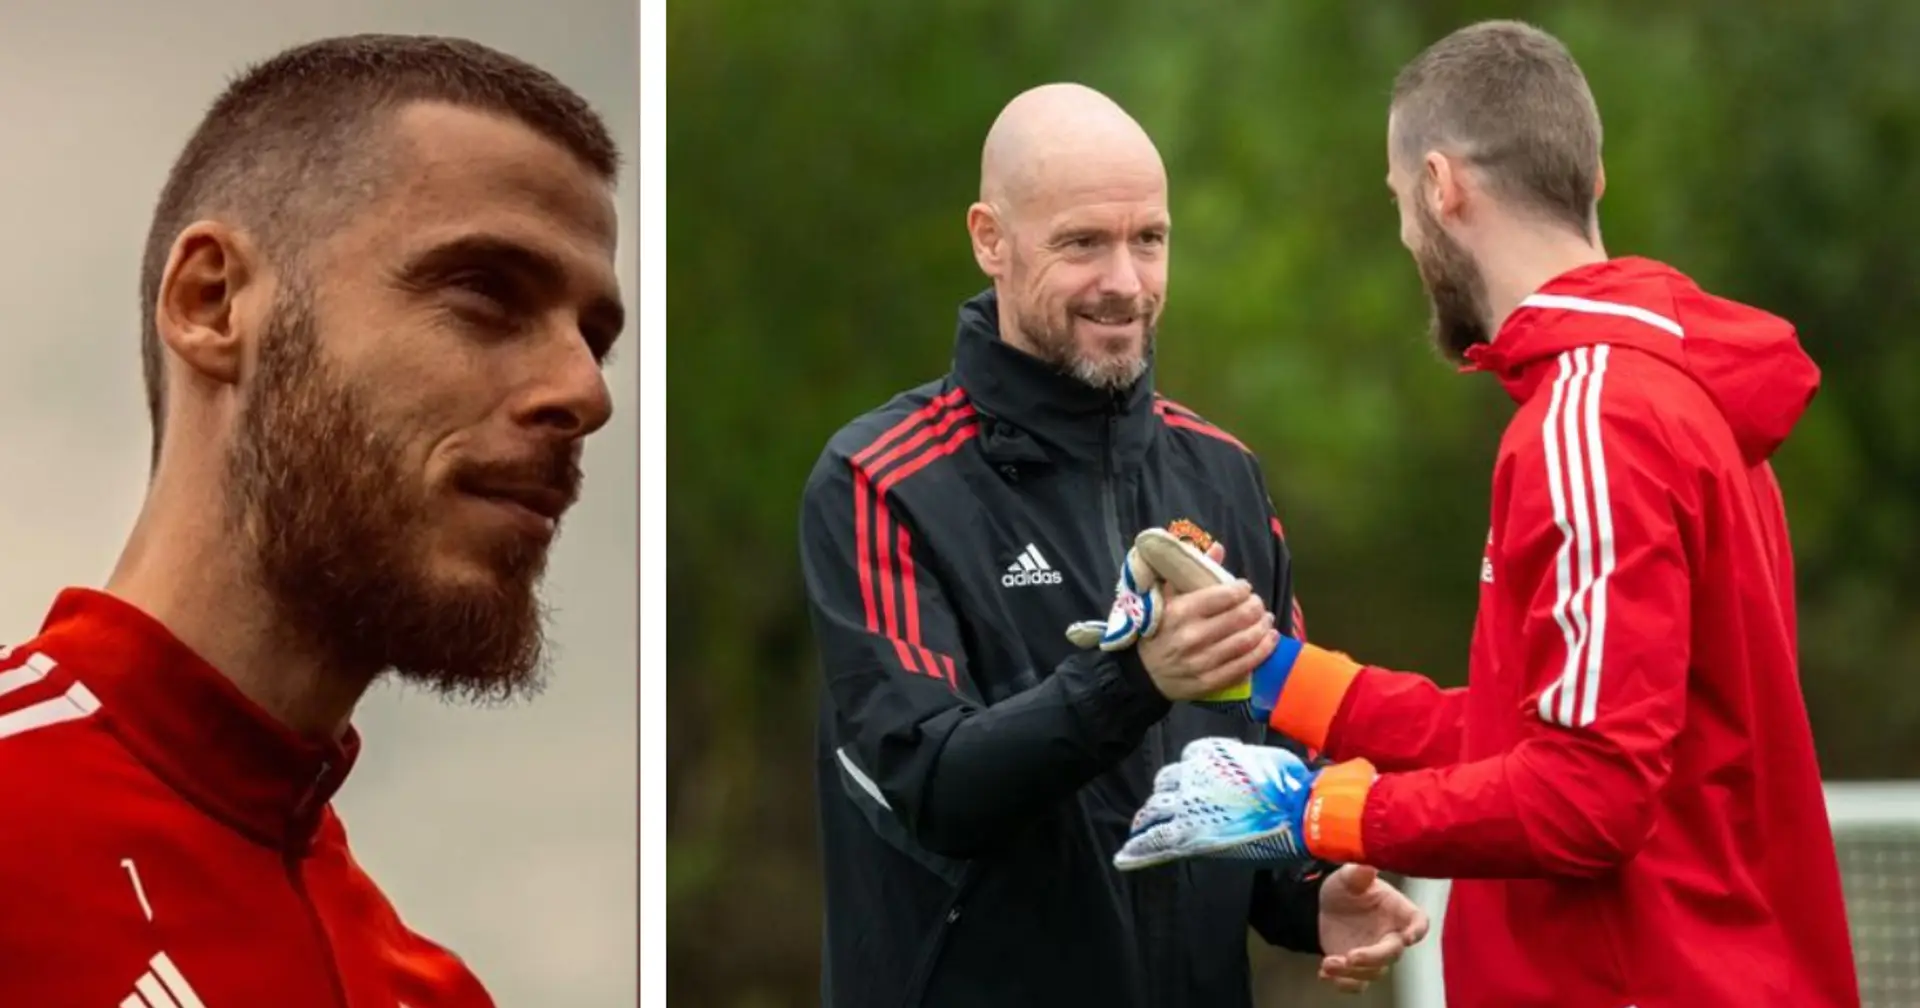 Look who's back! De Gea spotted in training ahead of Real Betis clash